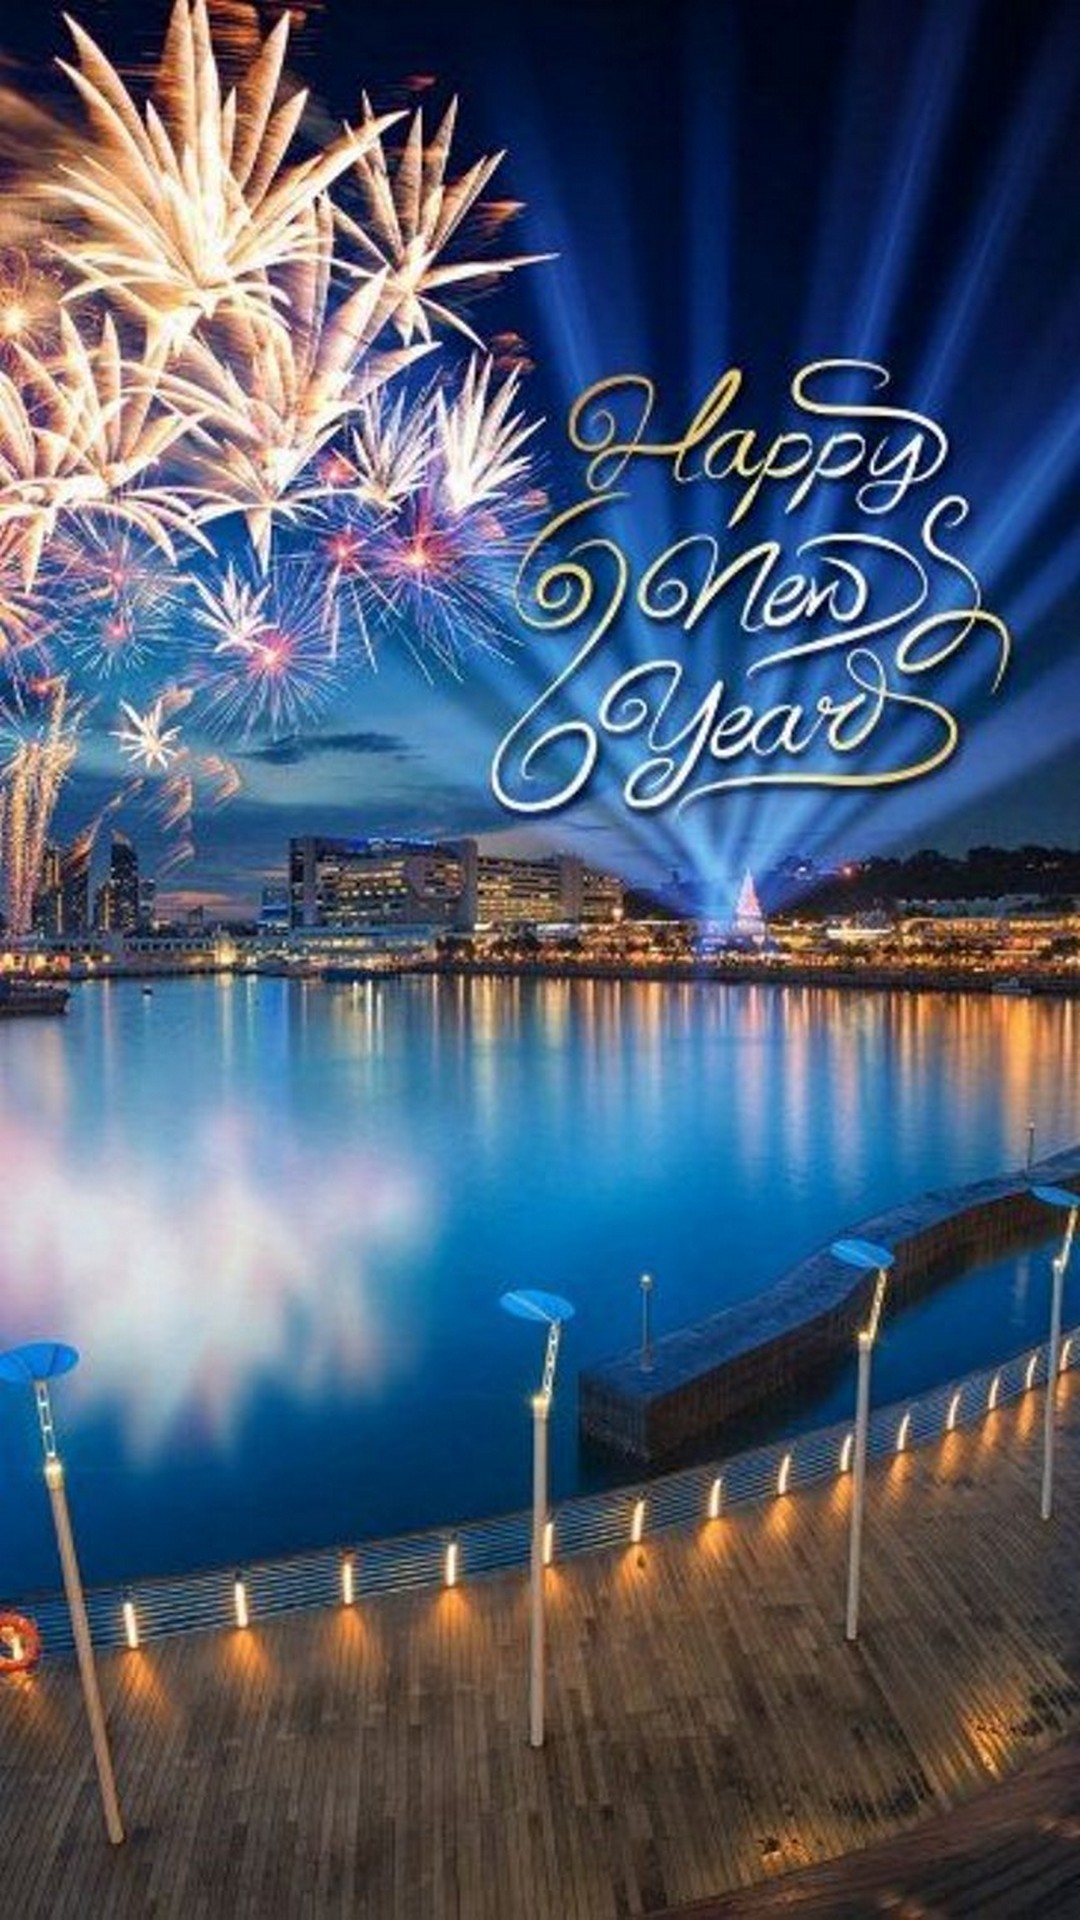 iPhone Wallpaper Happy New Year 2018